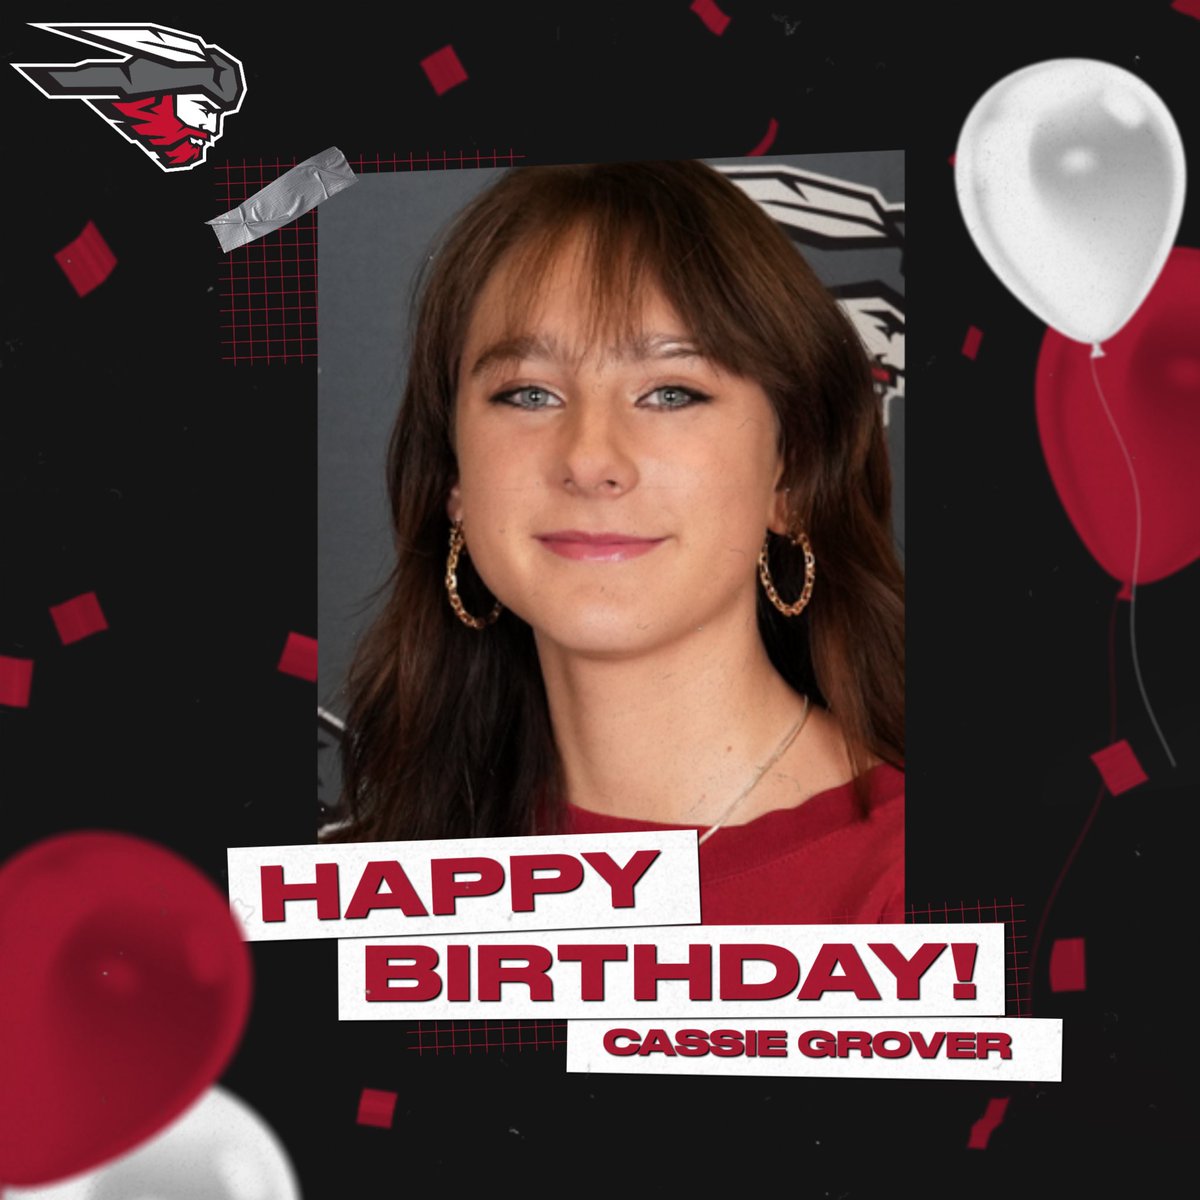 Please join us in wishing a Happy Birthday to our Student Manager Cassie Grover!